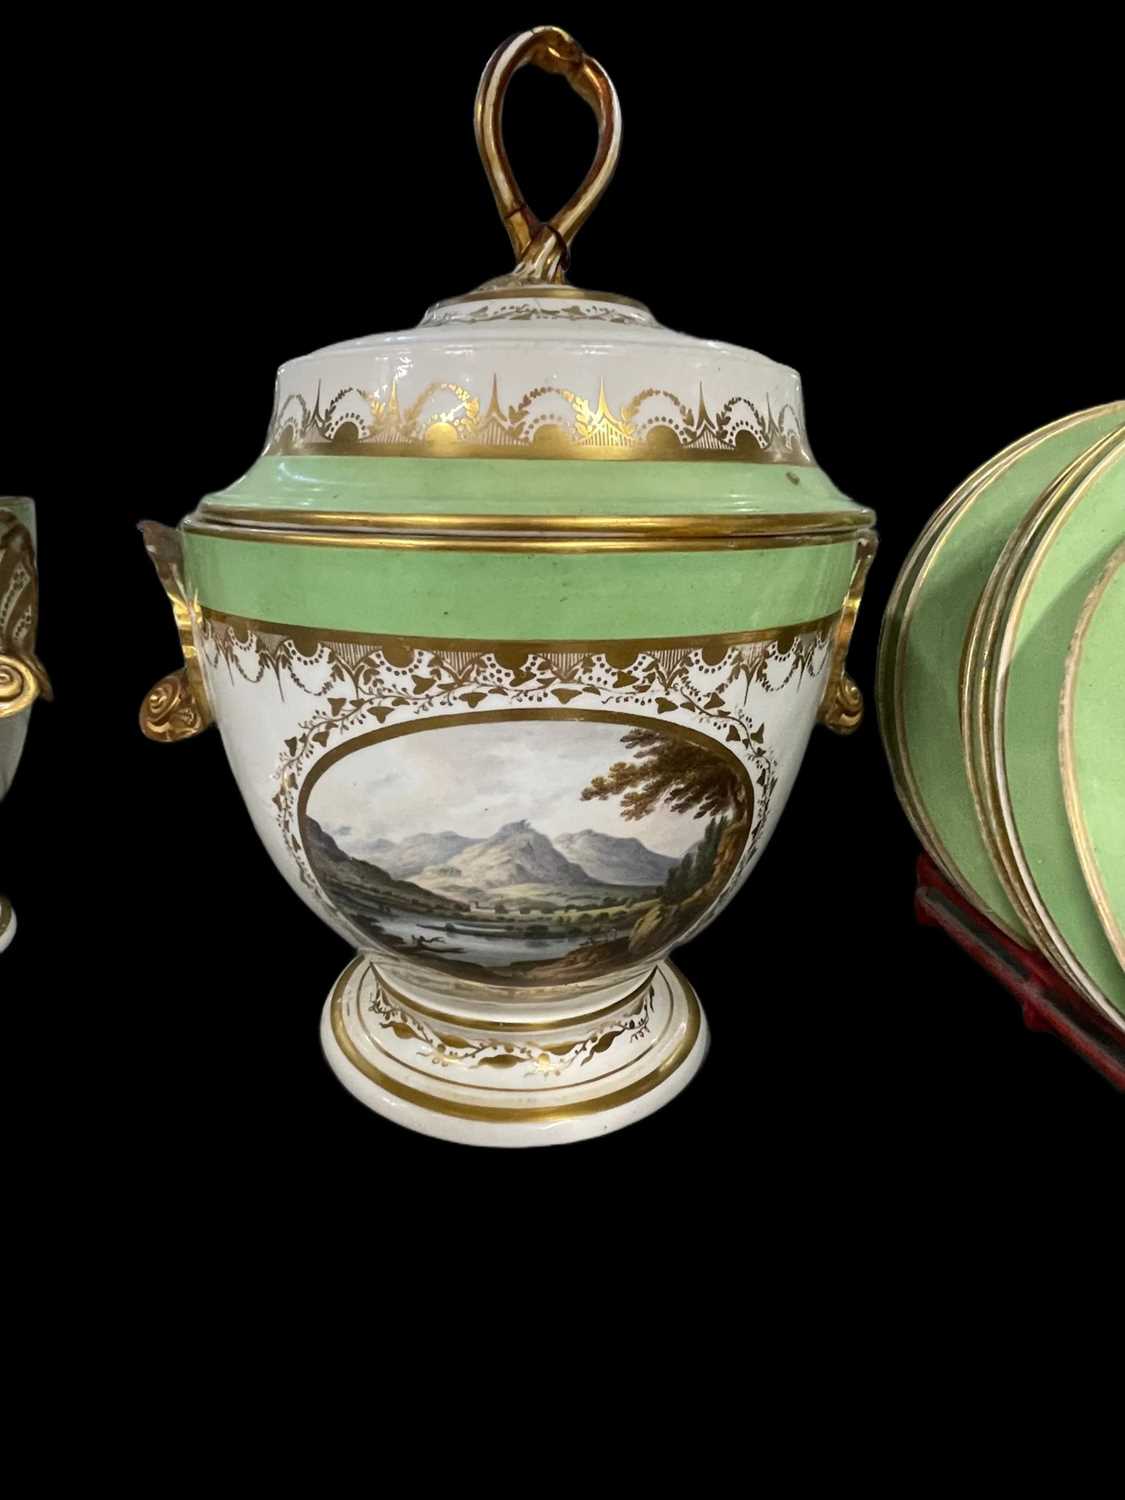 Early 19th cent. Ceramics: - Image 2 of 6